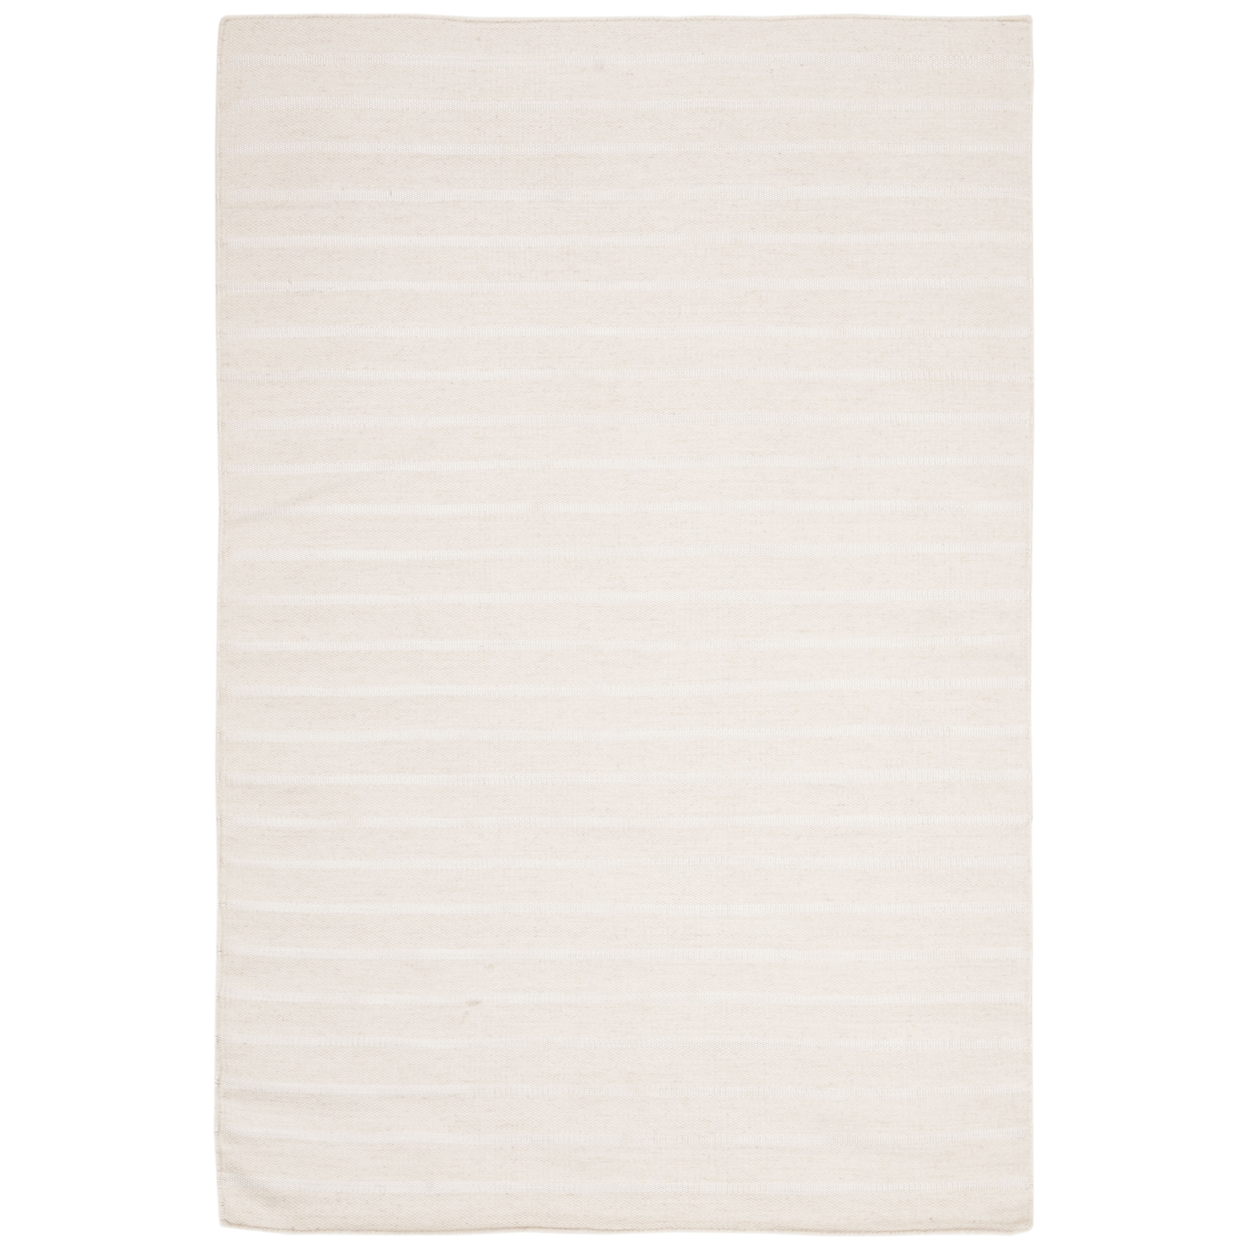 SAFAVIEH Dhurries Collection DHU313D Handwoven White Rug - 4' X 6'